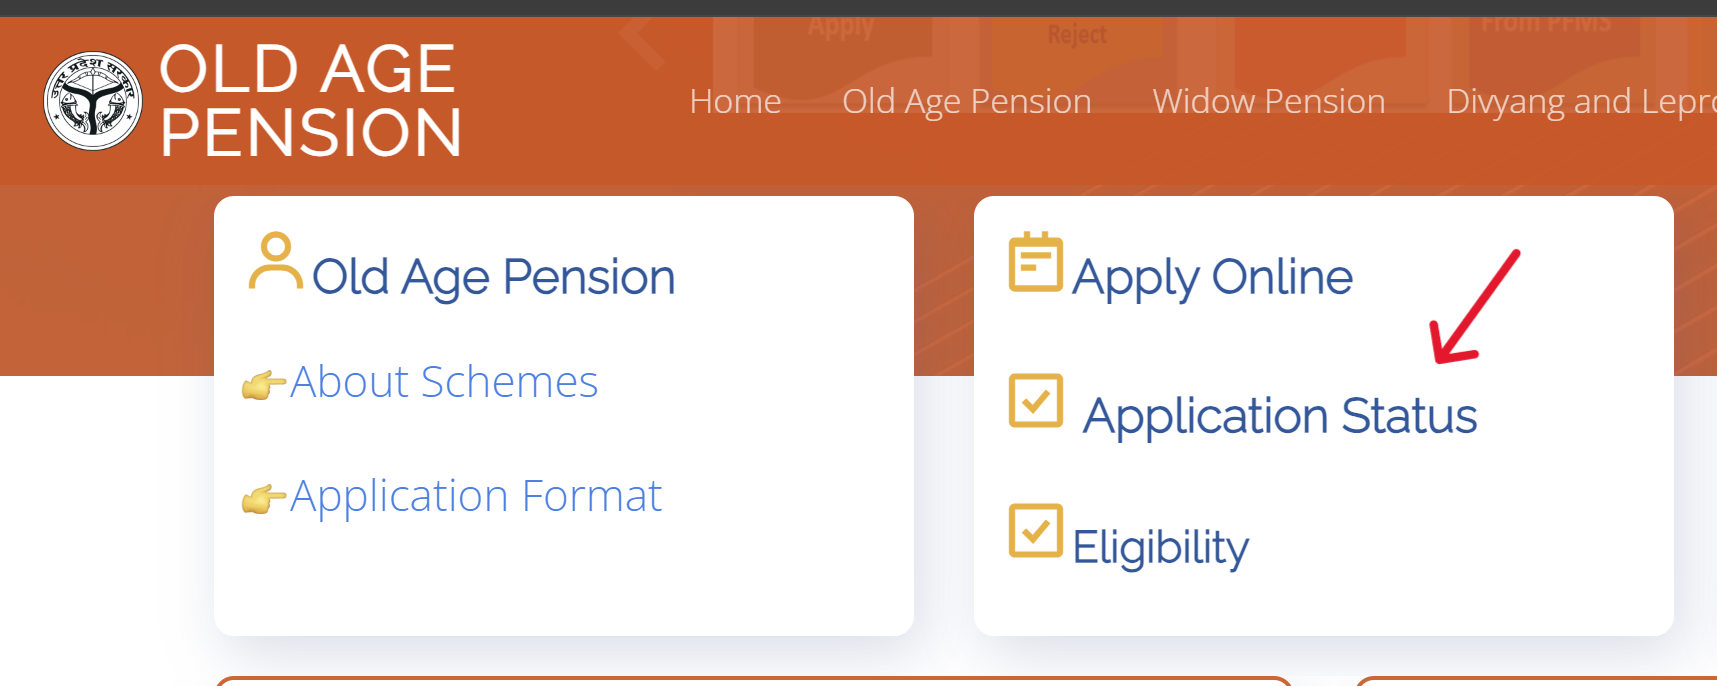 UP Old Age Pension Application Status